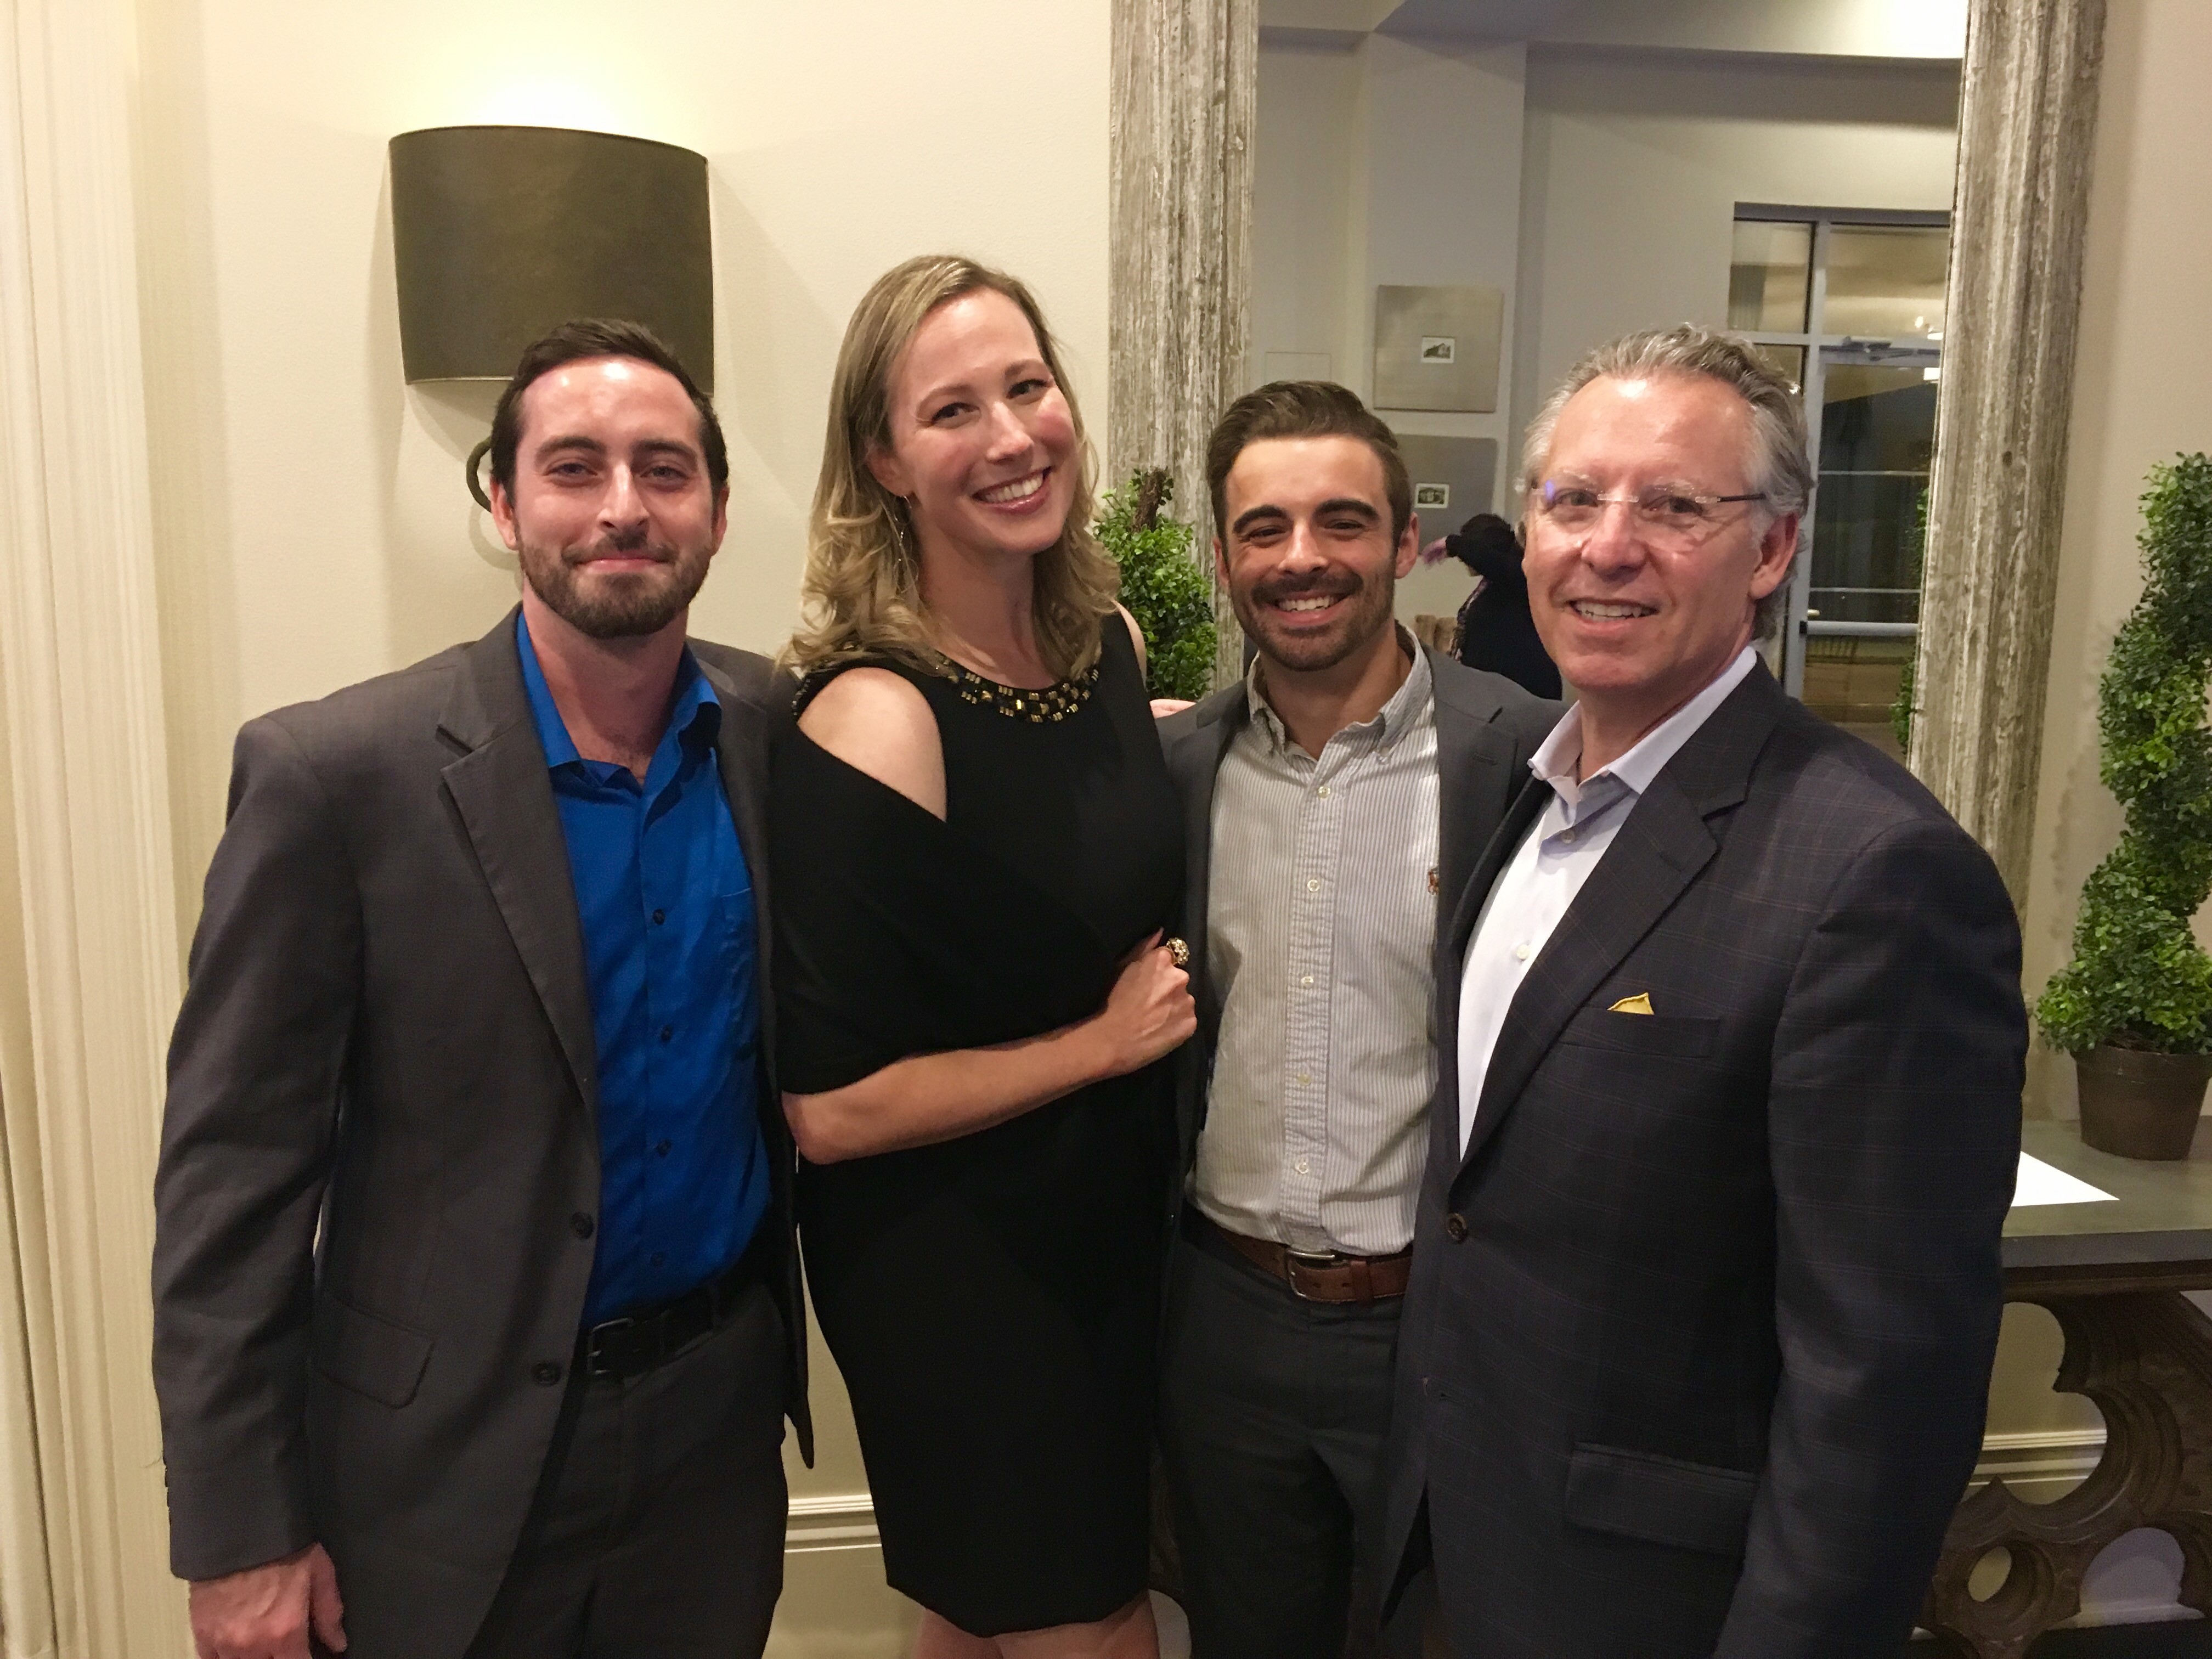 Stirling Properties employees attend the Cystic Fibrosis Foundation’s Uncork the Cure